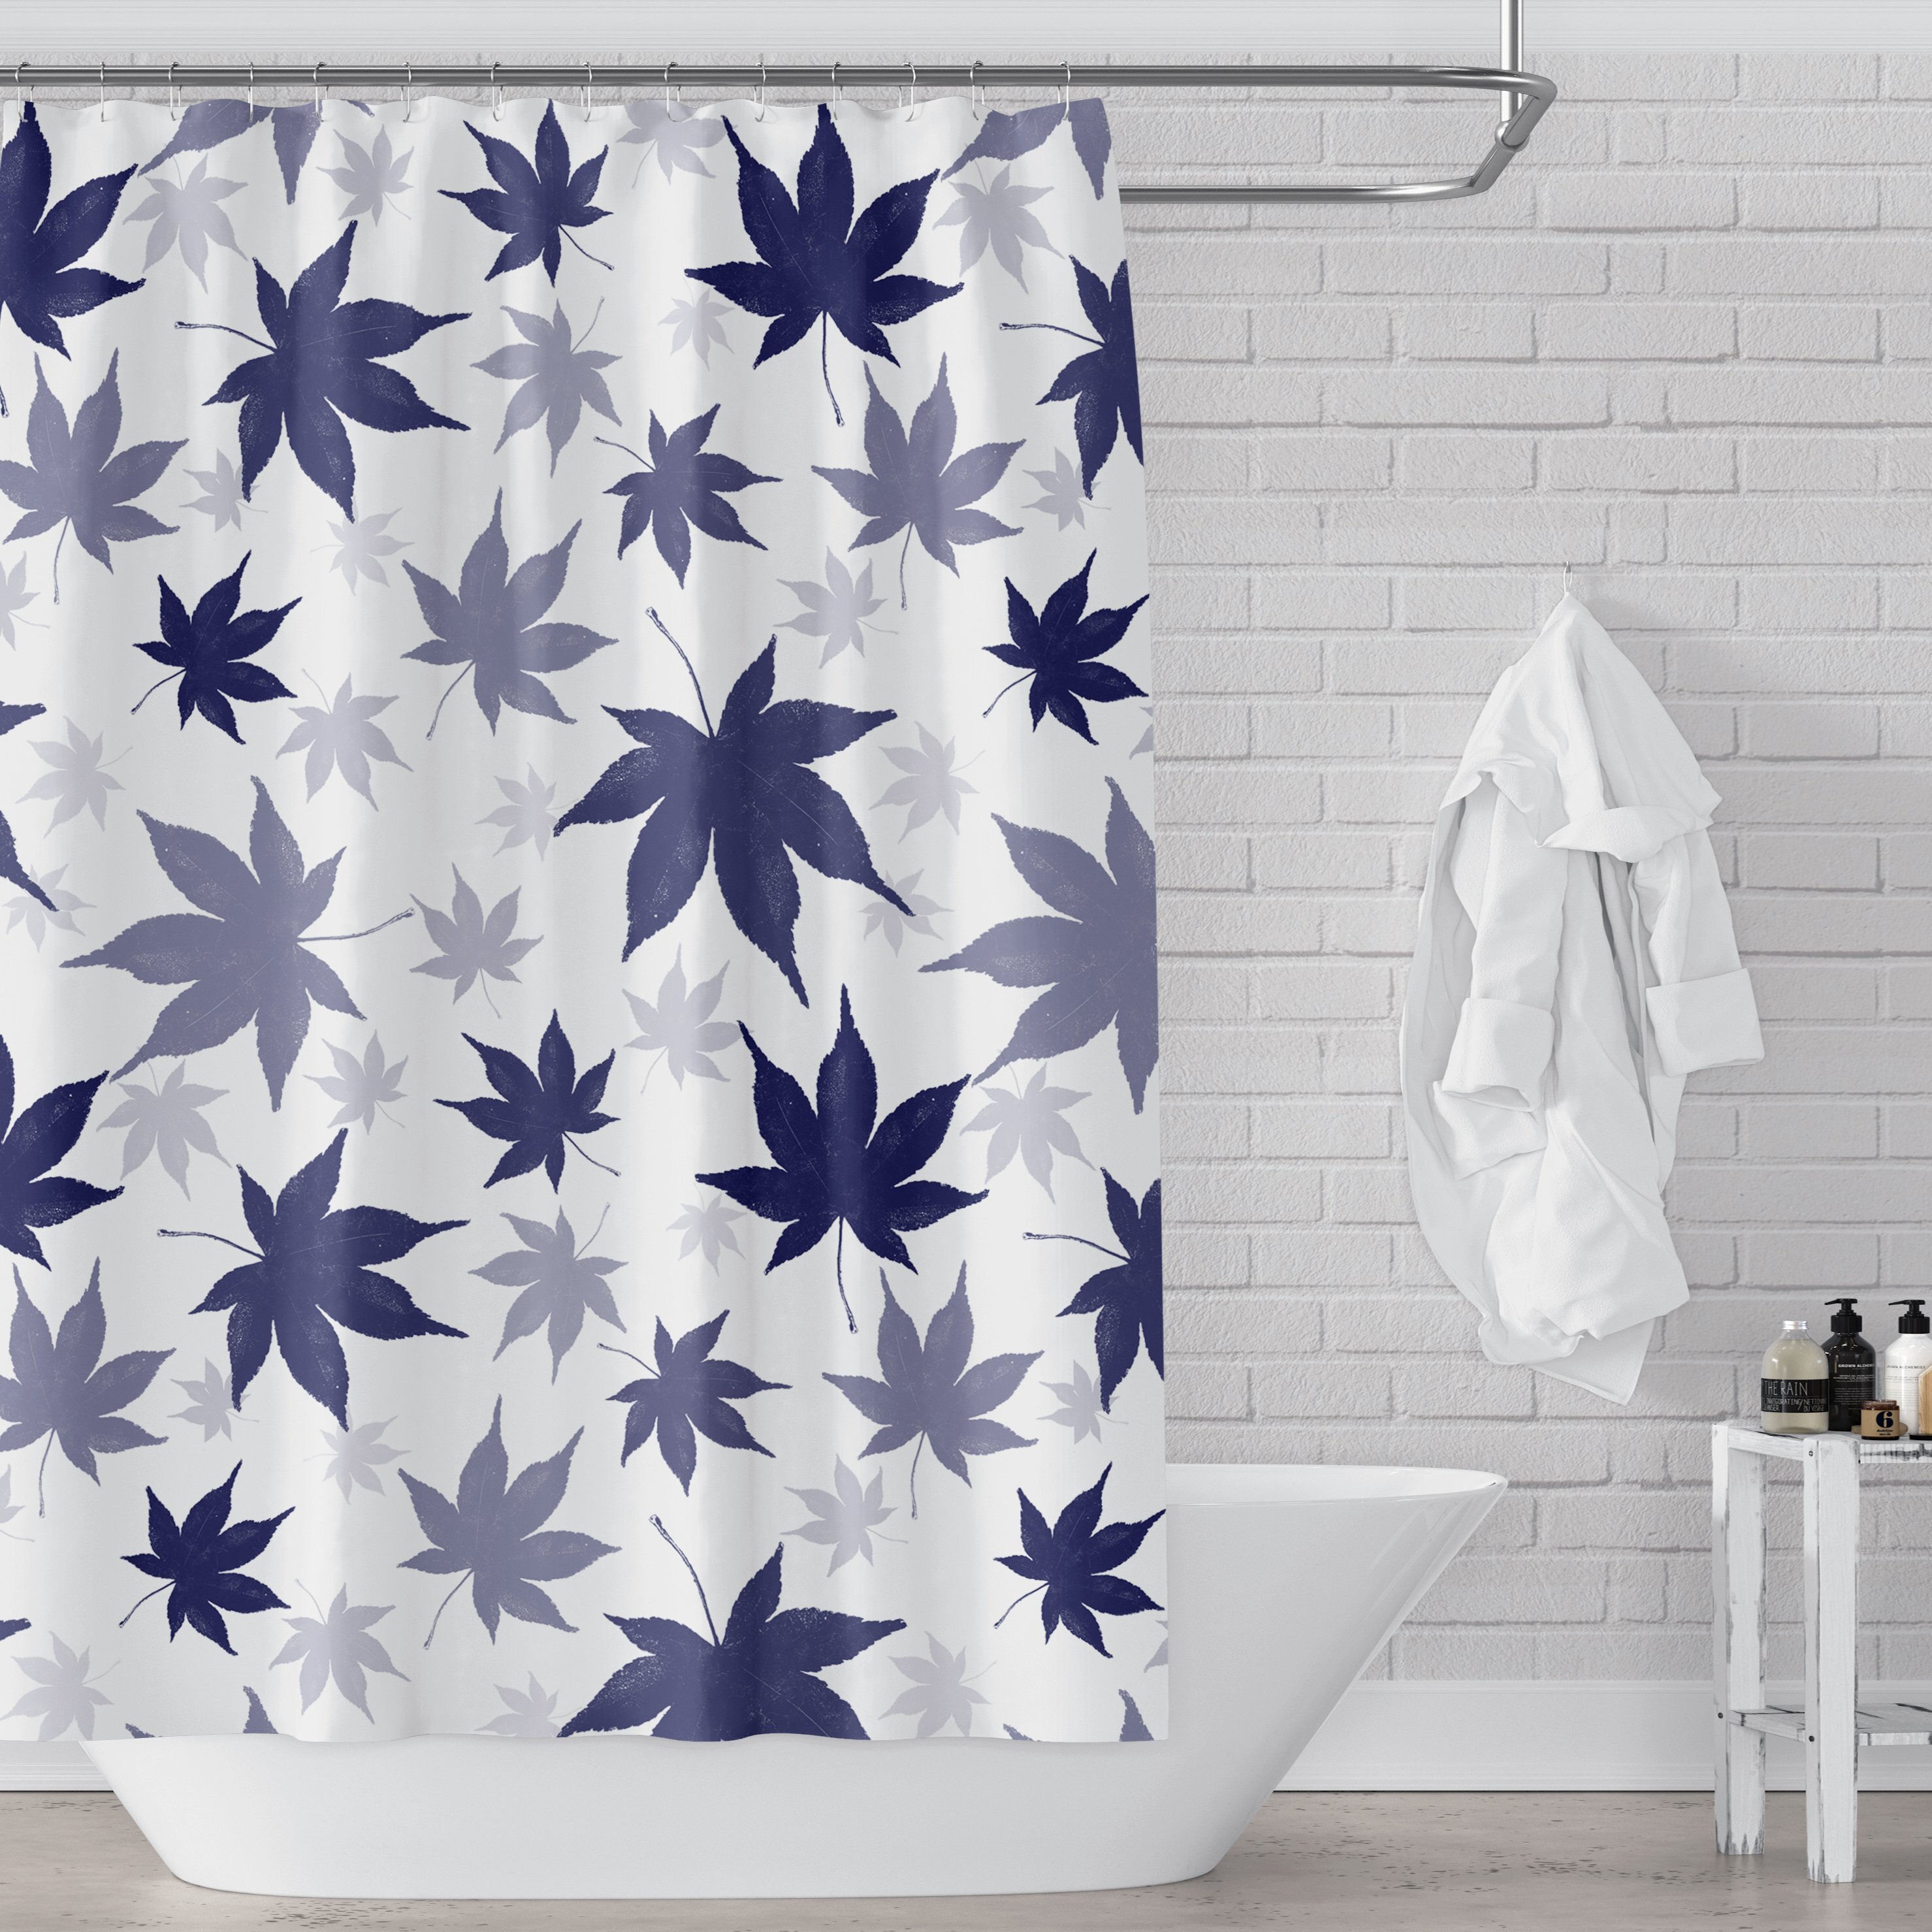 Waterproof Polyester 71" Maple Leaf Trees Pattern Shower Curtain Fabric Bath US